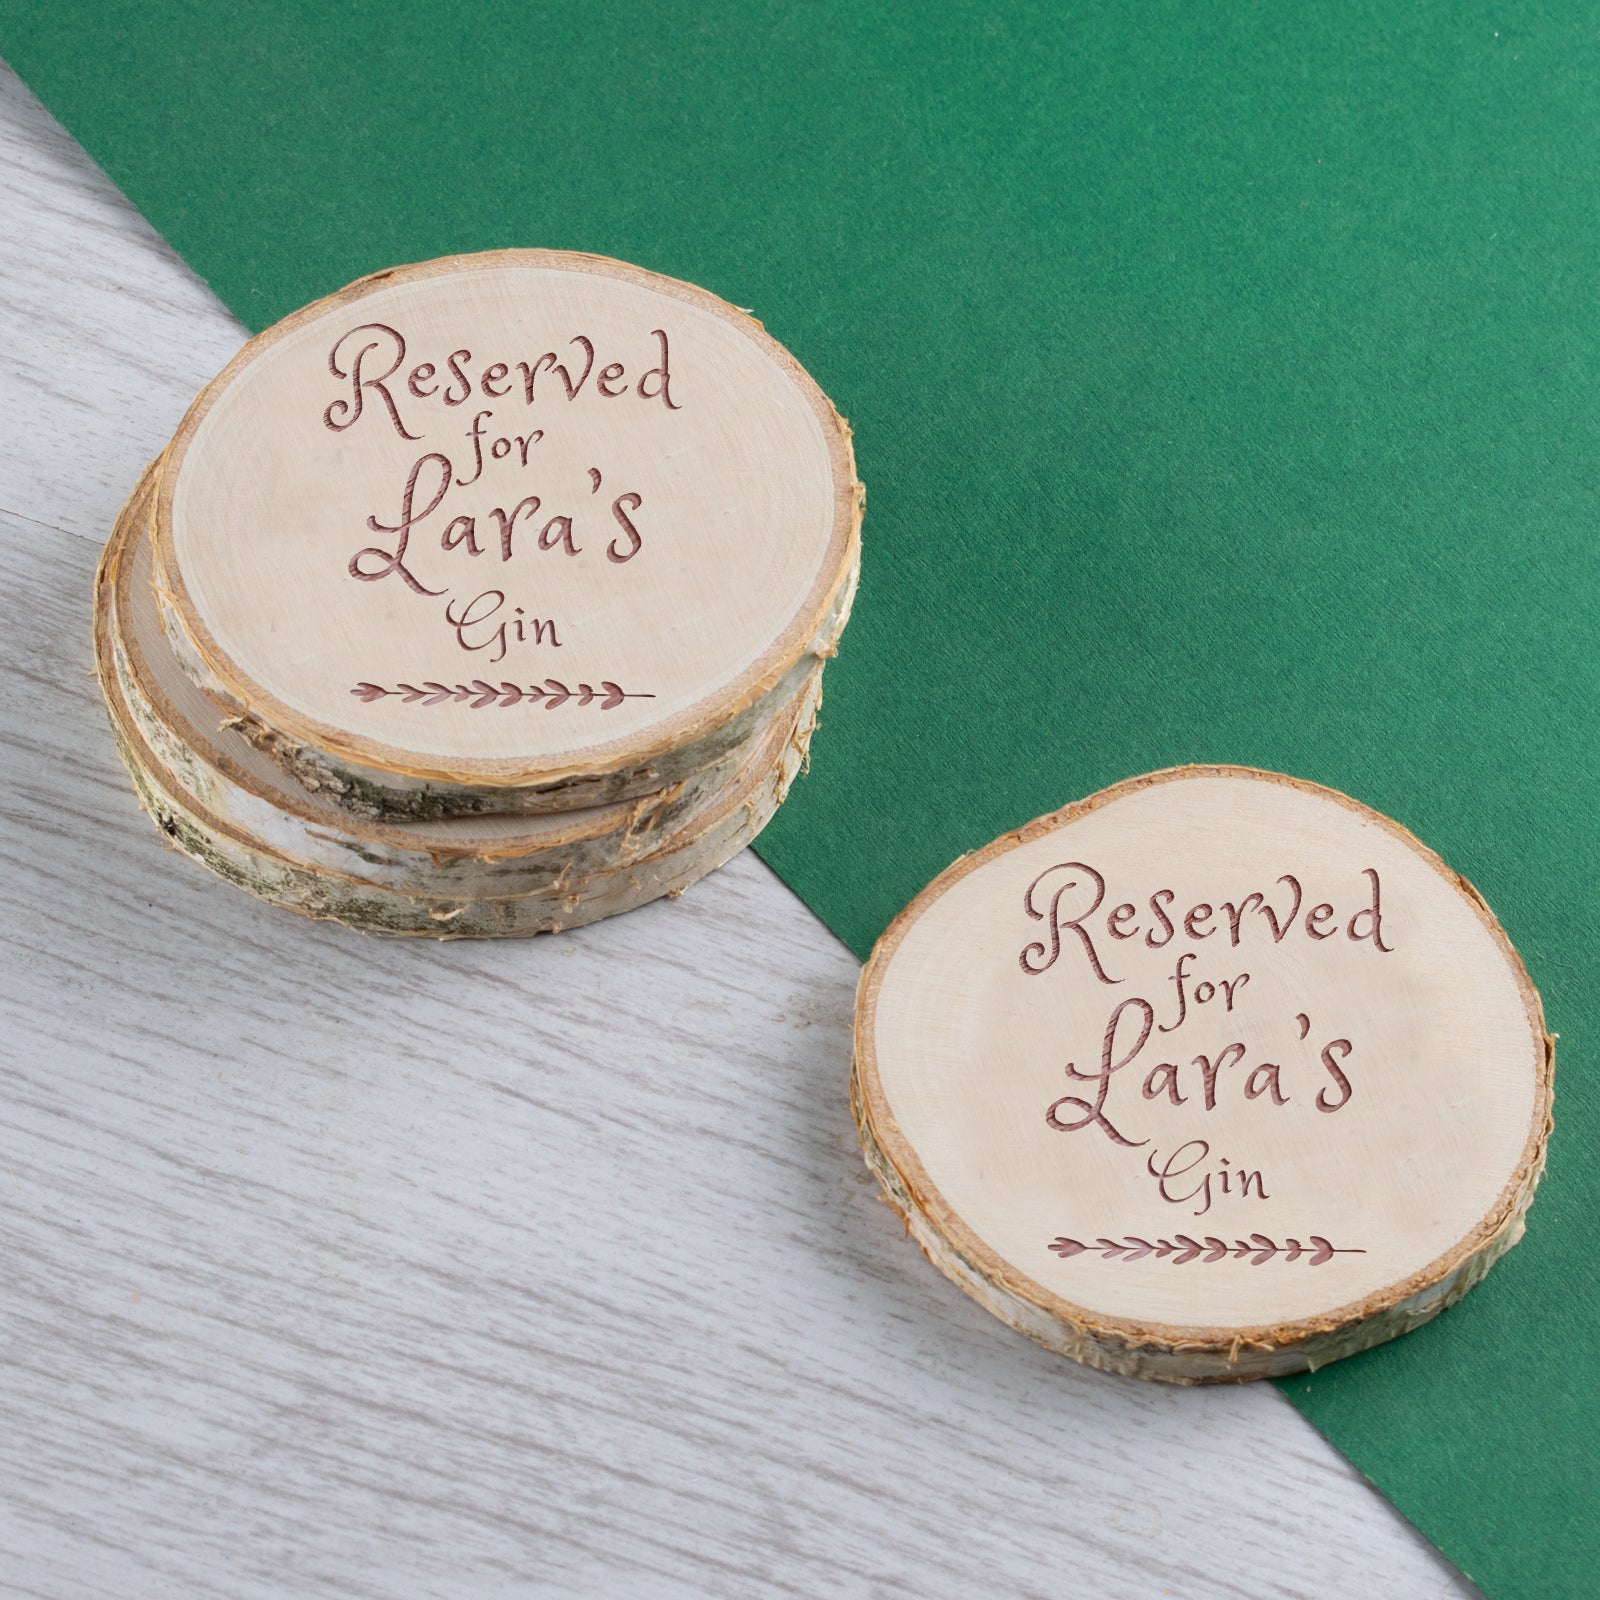 Personalised Engraved Wooden Coaster Wood Log - No Stains!